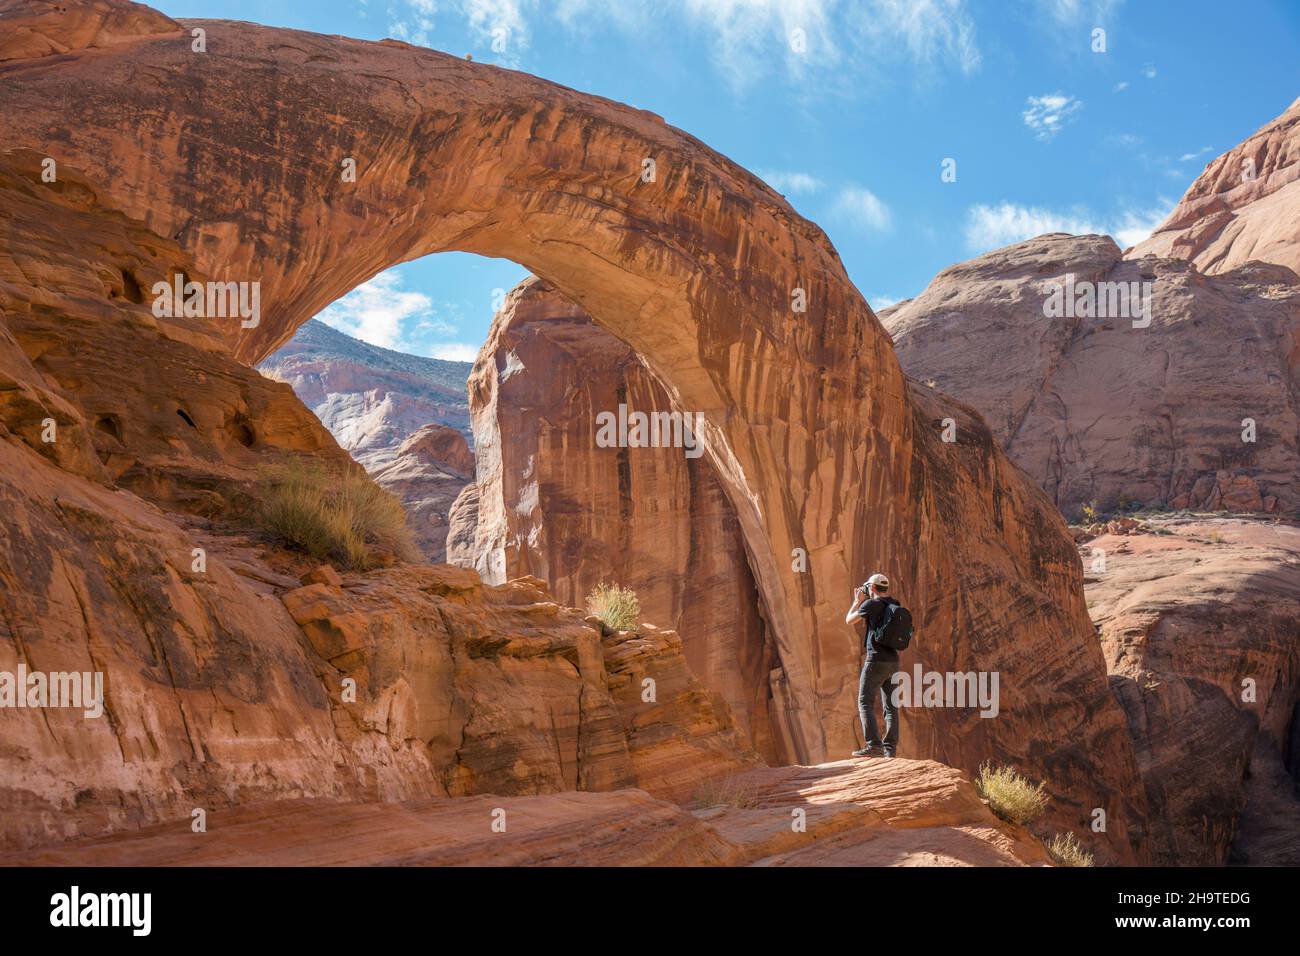 Glen Canyon National Recreation Area, Utah, USA. Photographer shooting backlit view of the huge sandstone arch of Rainbow Bridge National Monument. Stock Photo